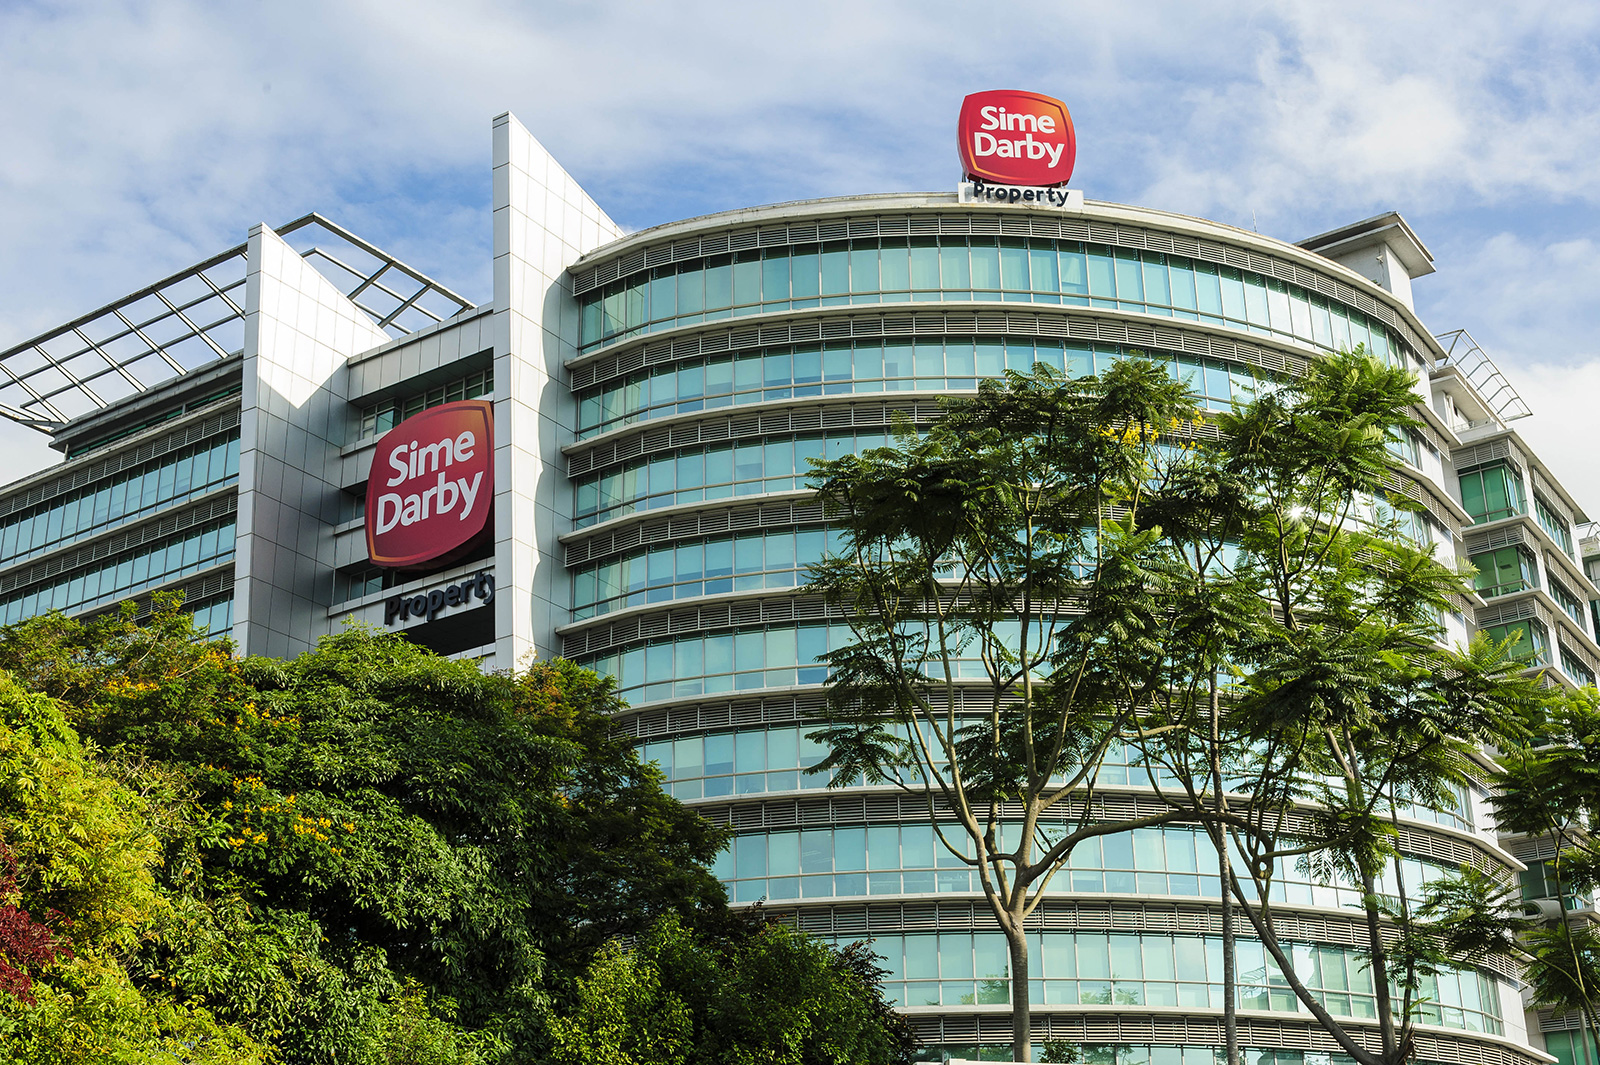 Sime Darby Property anticipates the property market to remain steady overall in 2023, with indications of healthy demand for landed residential and industrial products.